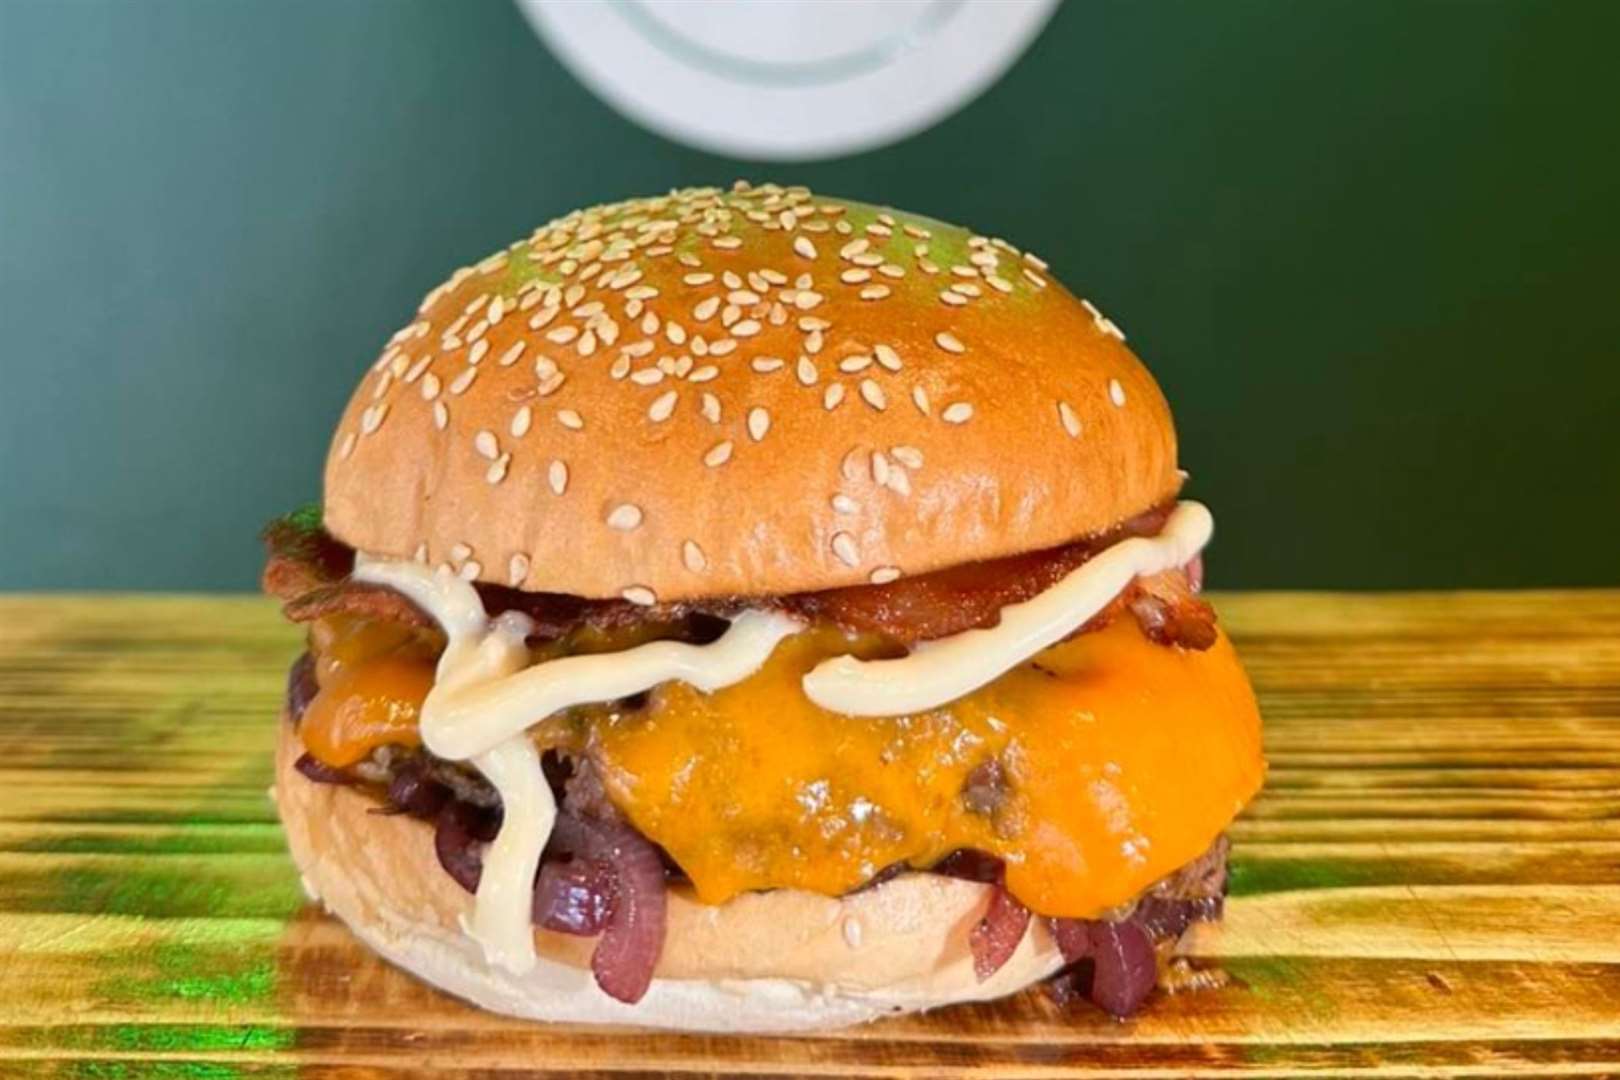 The Limitless burger is up against 15 others at the National Burger Awards. Picture: Please Sir!